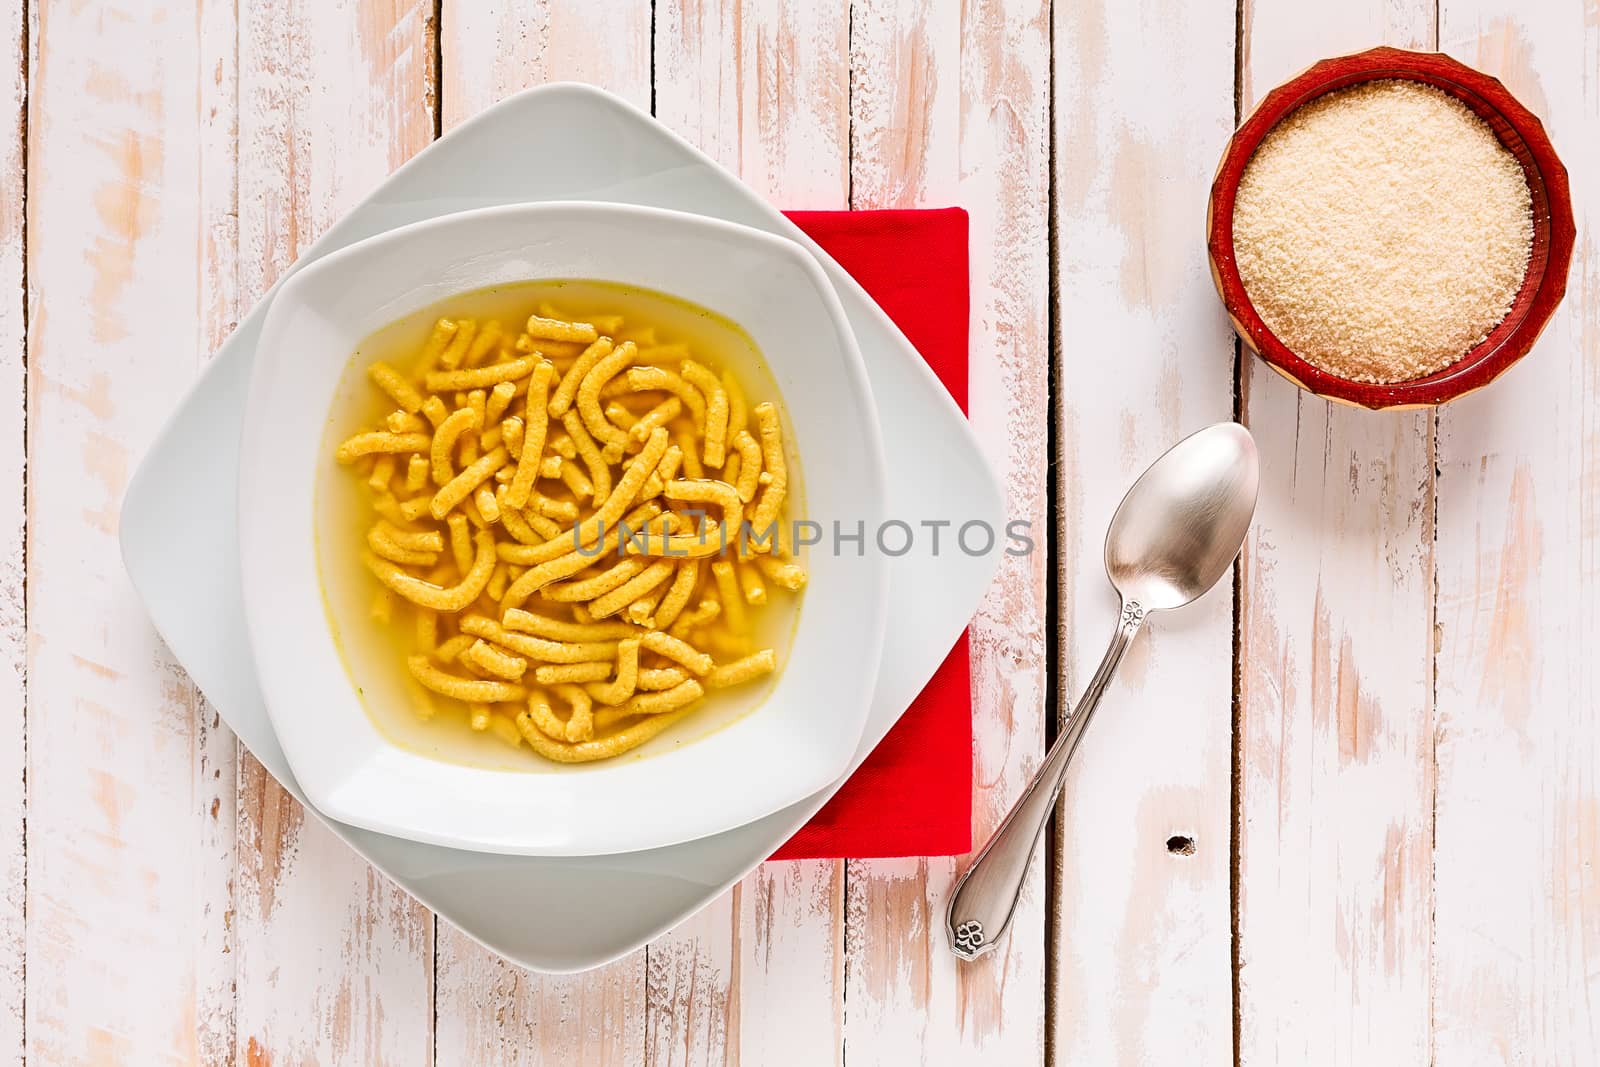 Italian passatelli in broth over a wooden table seen from above